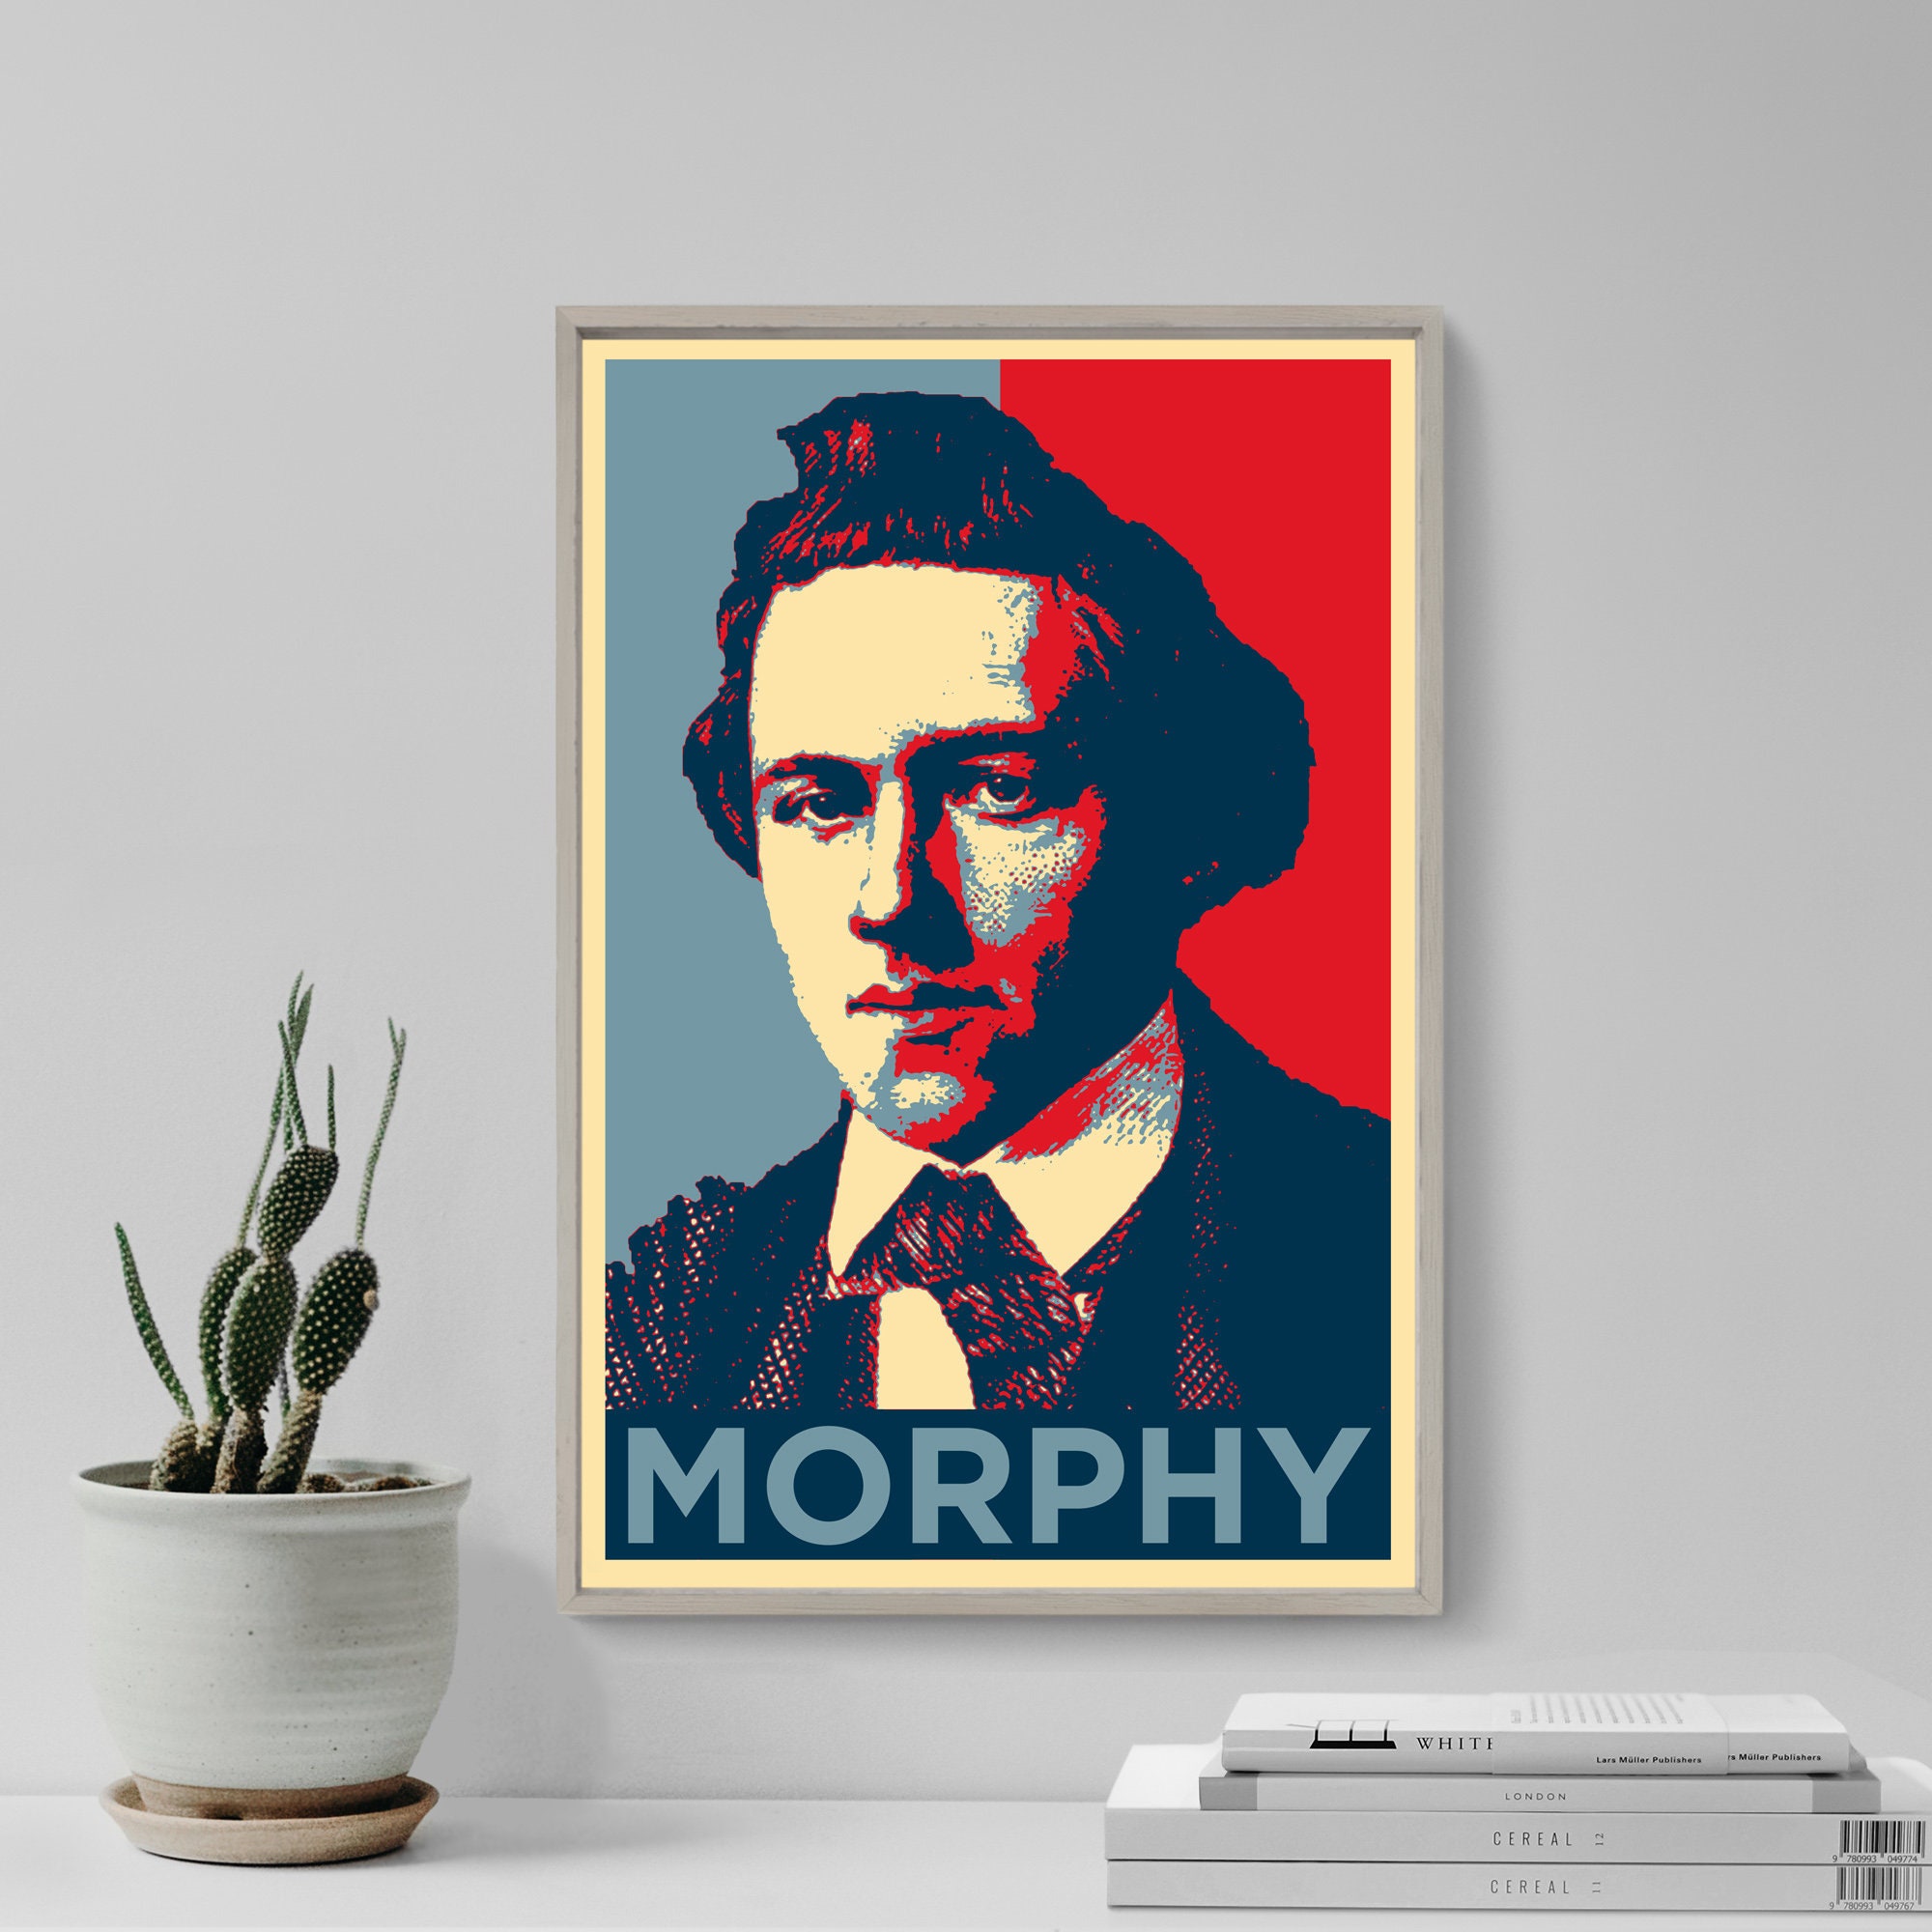 TOP 6 QUOTES BY PAUL MORPHY